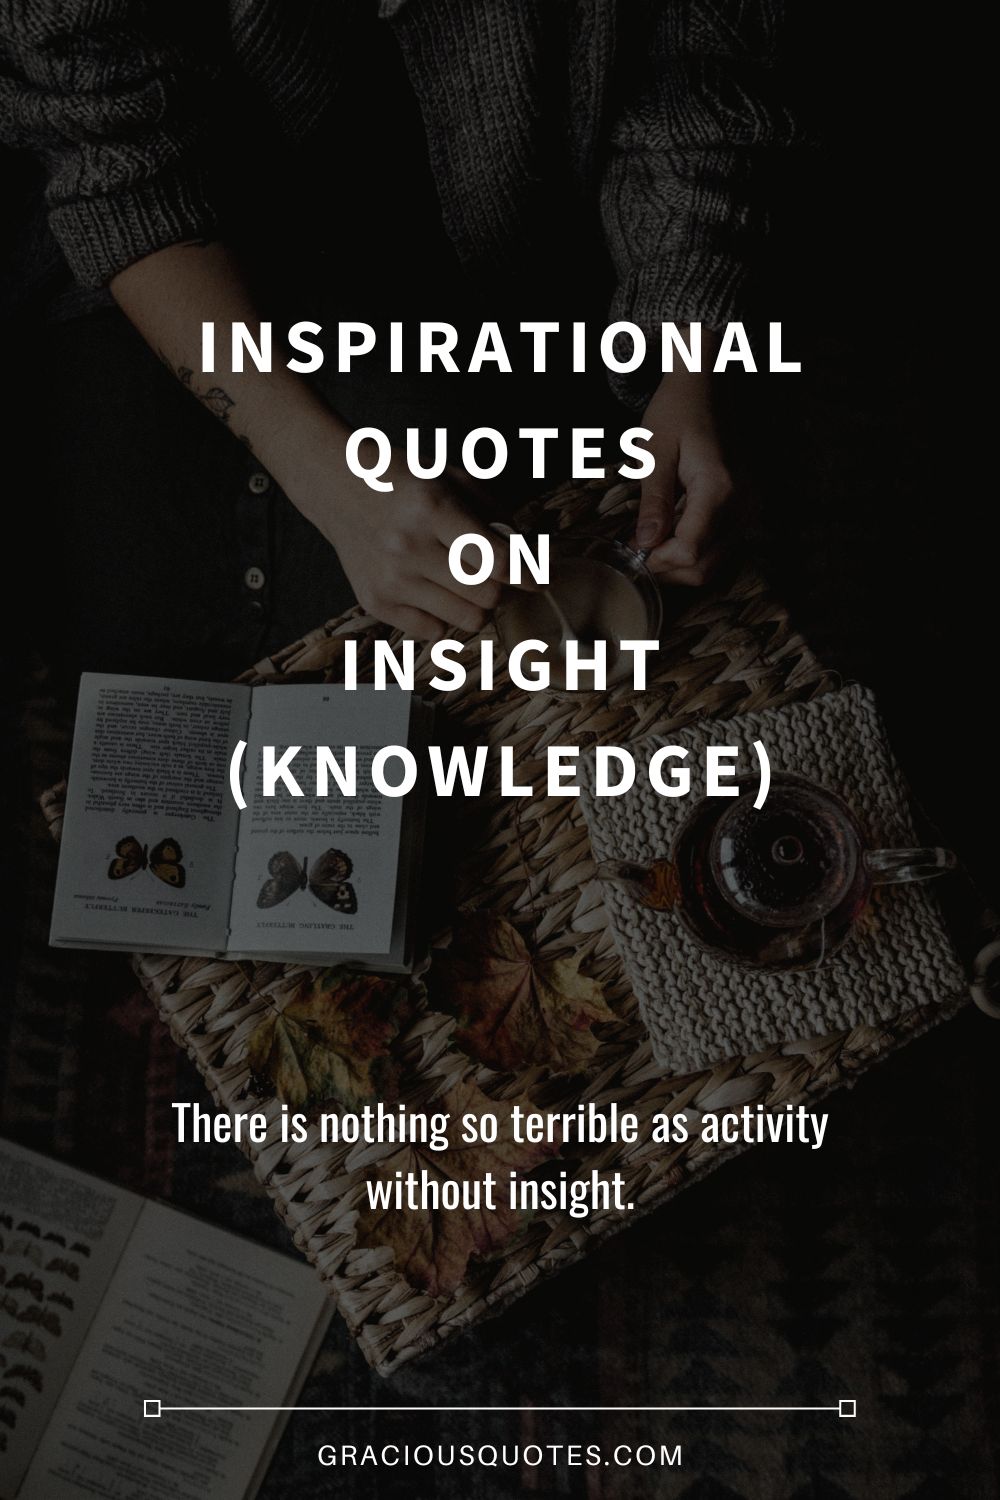 Inspirational Quotes on Insight (KNOWLEDGE) - Gracious Quotes